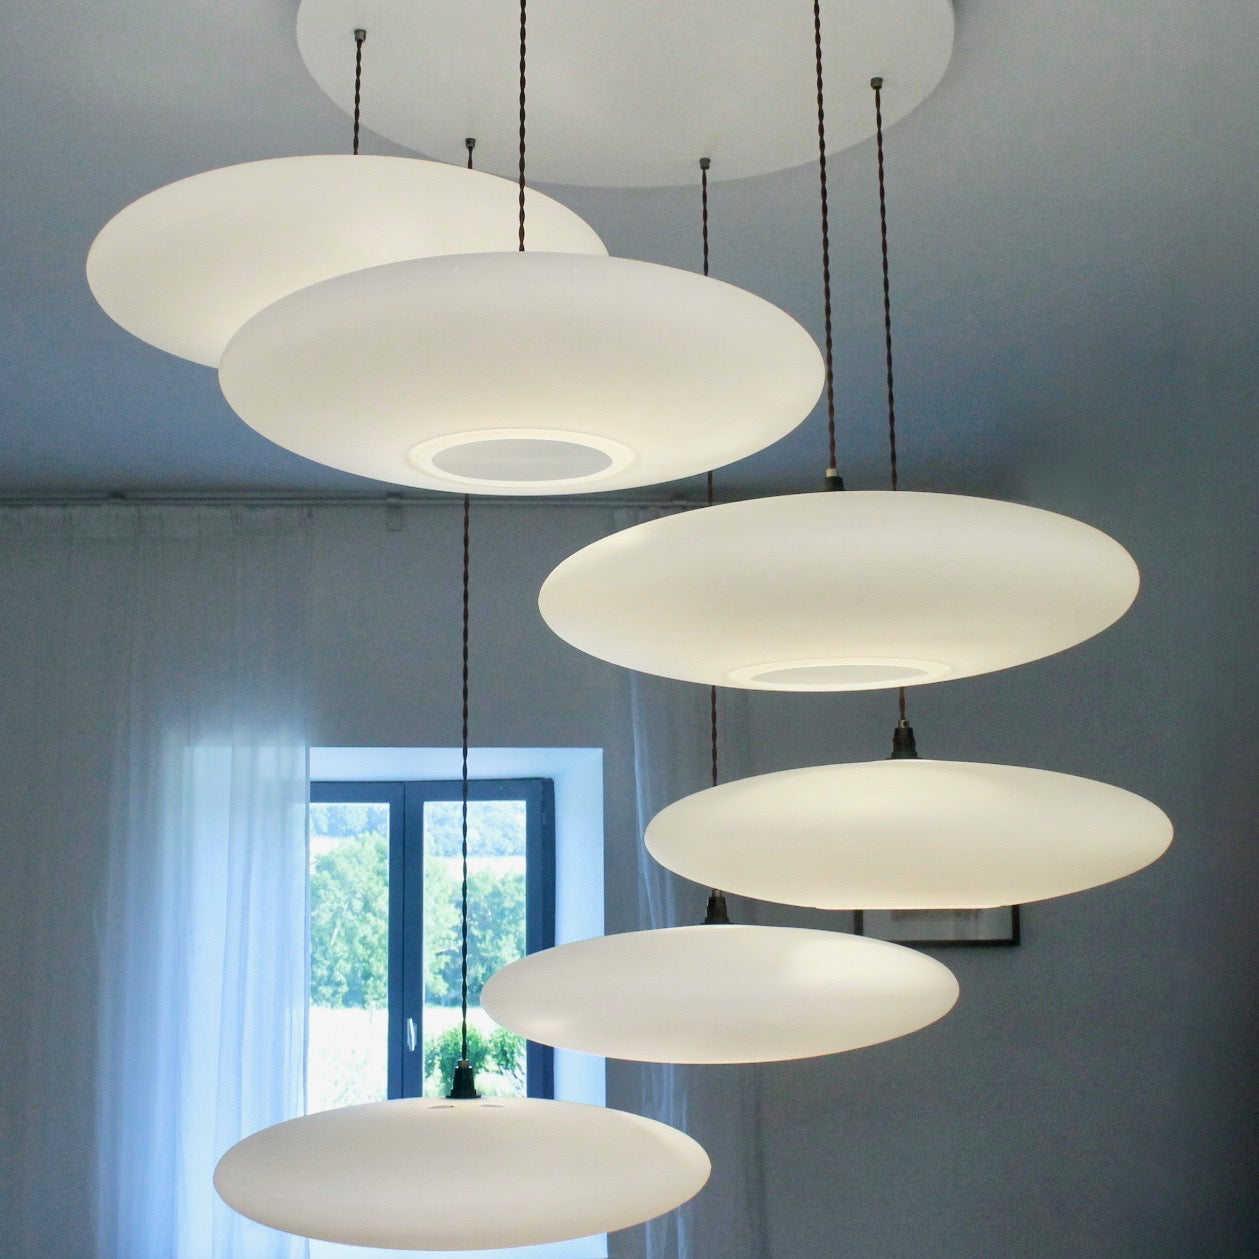 6-Drop Suspension lighting, One Foot Taller, Ethel Inverse, white calm diffuse light, stairwell lighting, pendant lights